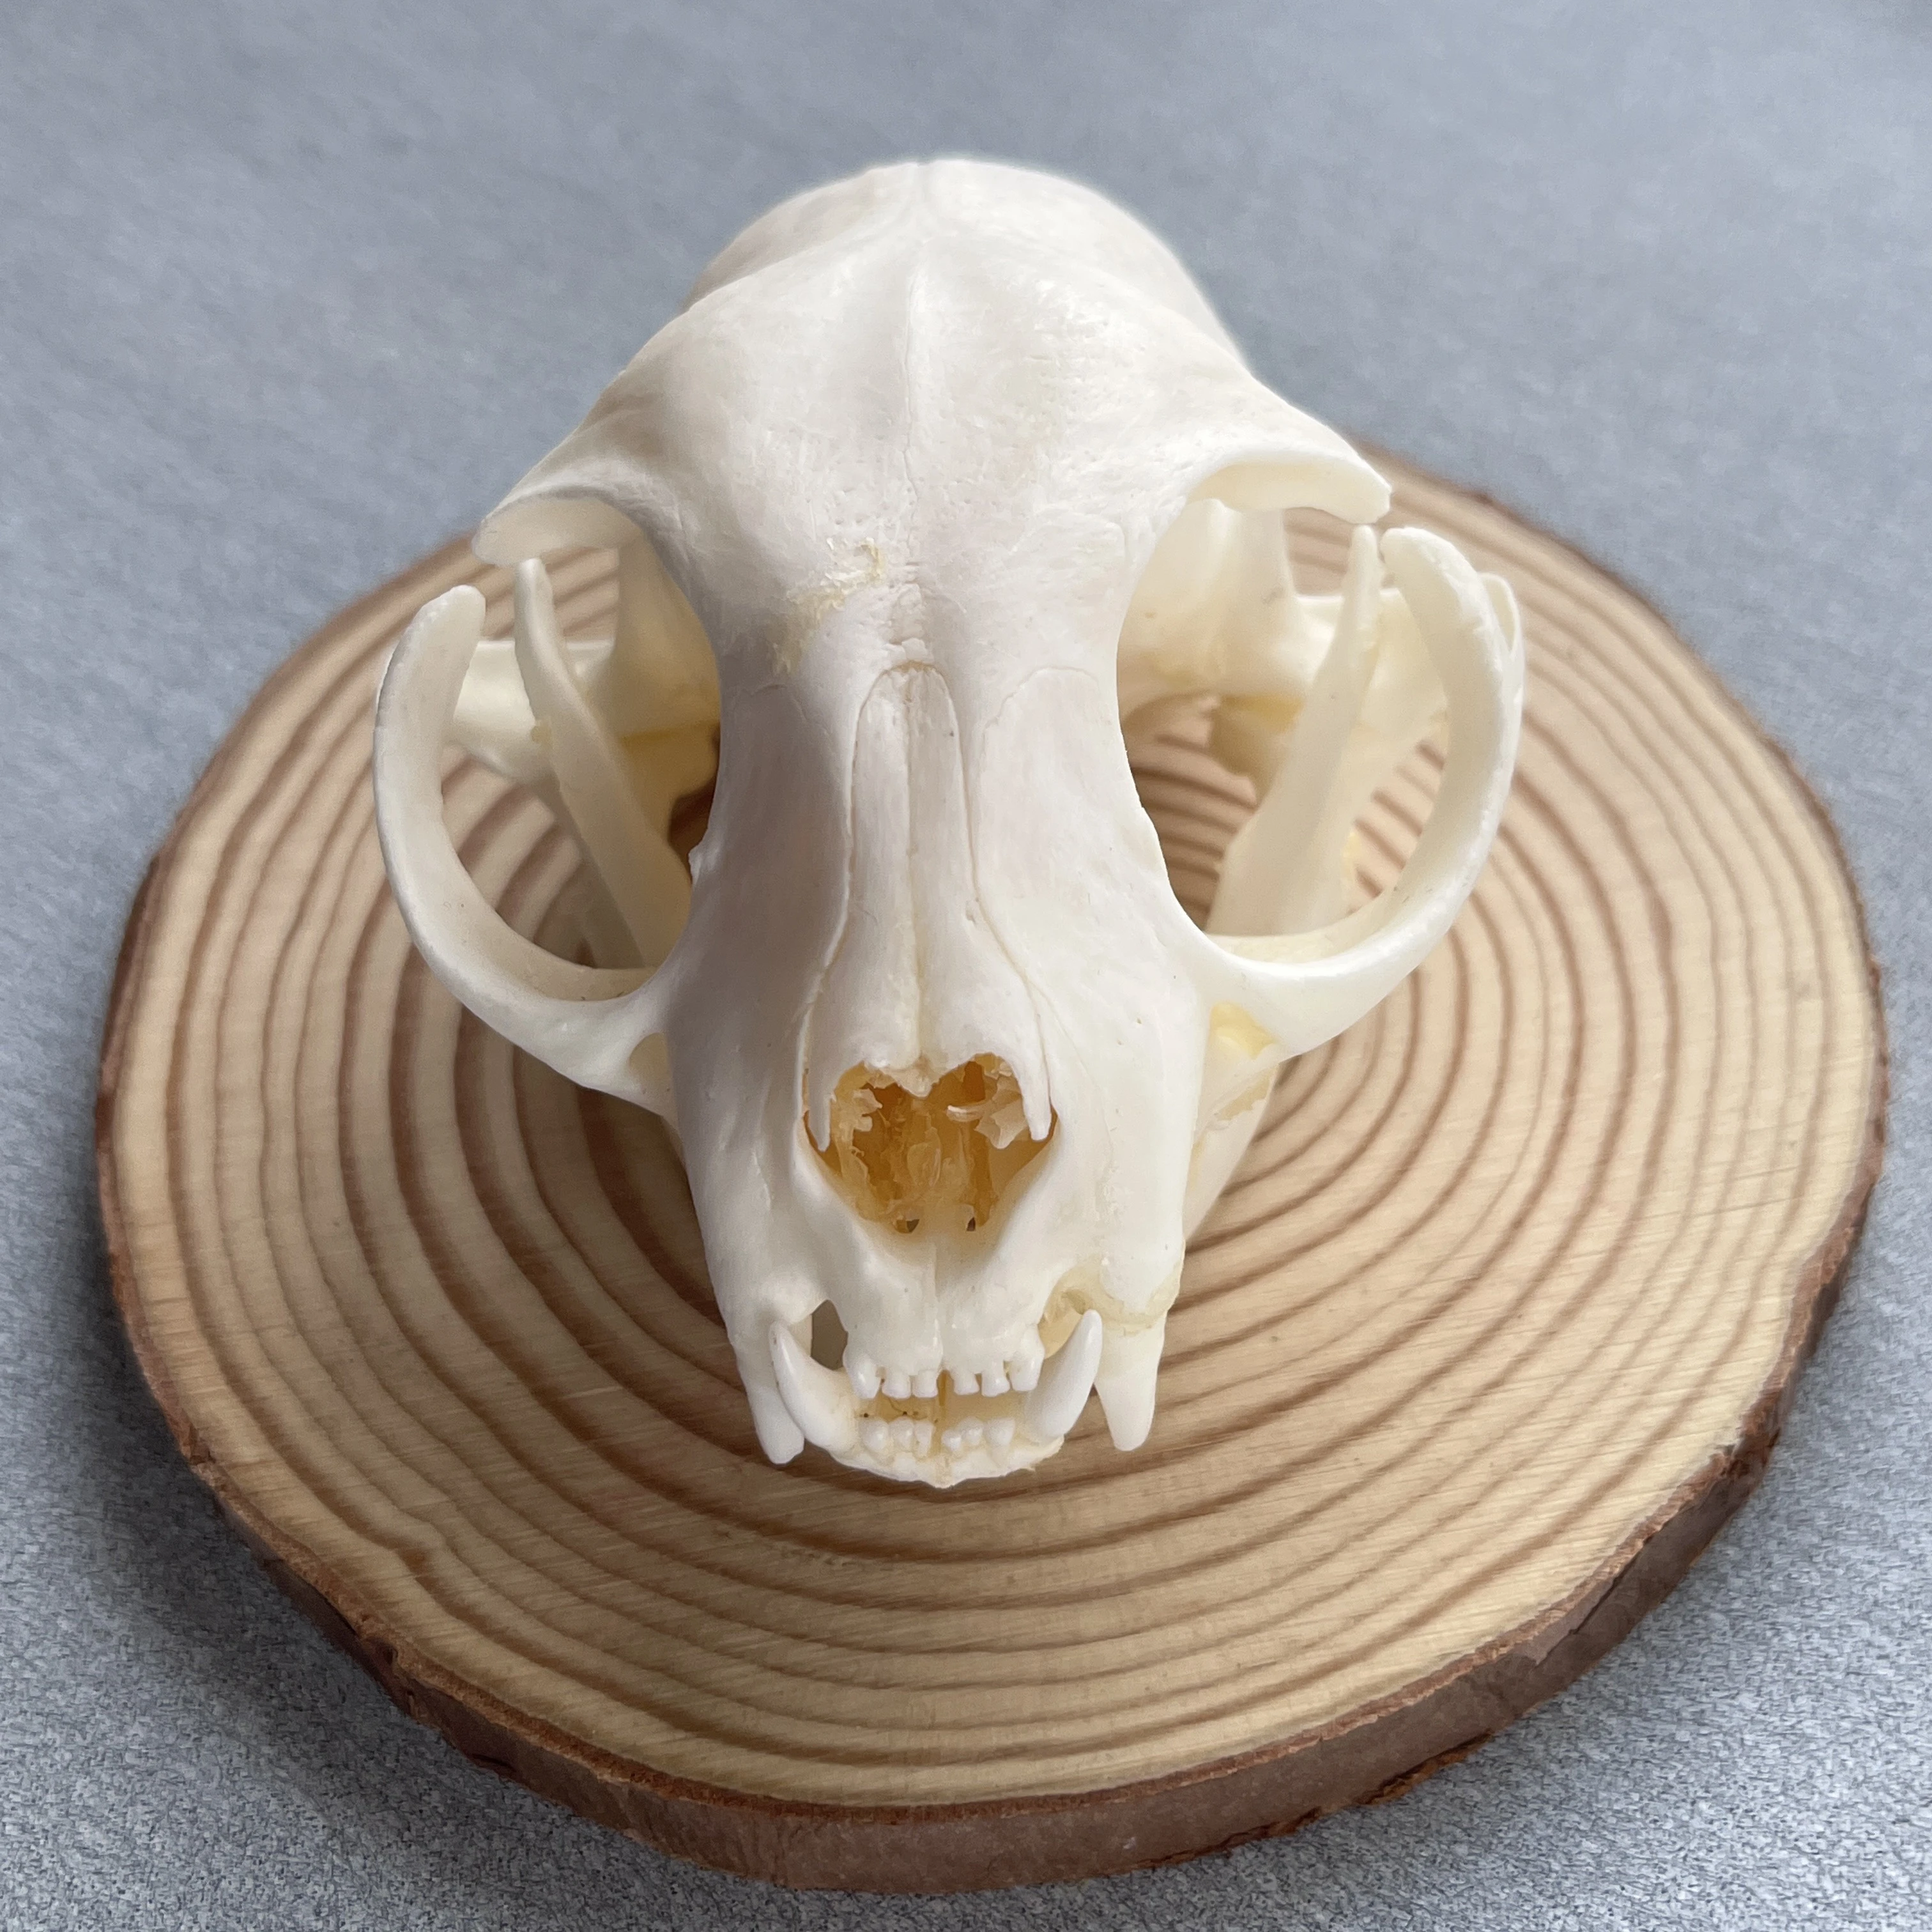 Taxidermy Real Bone Animal Skull, Bones Real For Craft, Skull Decoration  For Home, Specimen Collectibles Study, Special Gifts - Figurines &  Miniatures - AliExpress